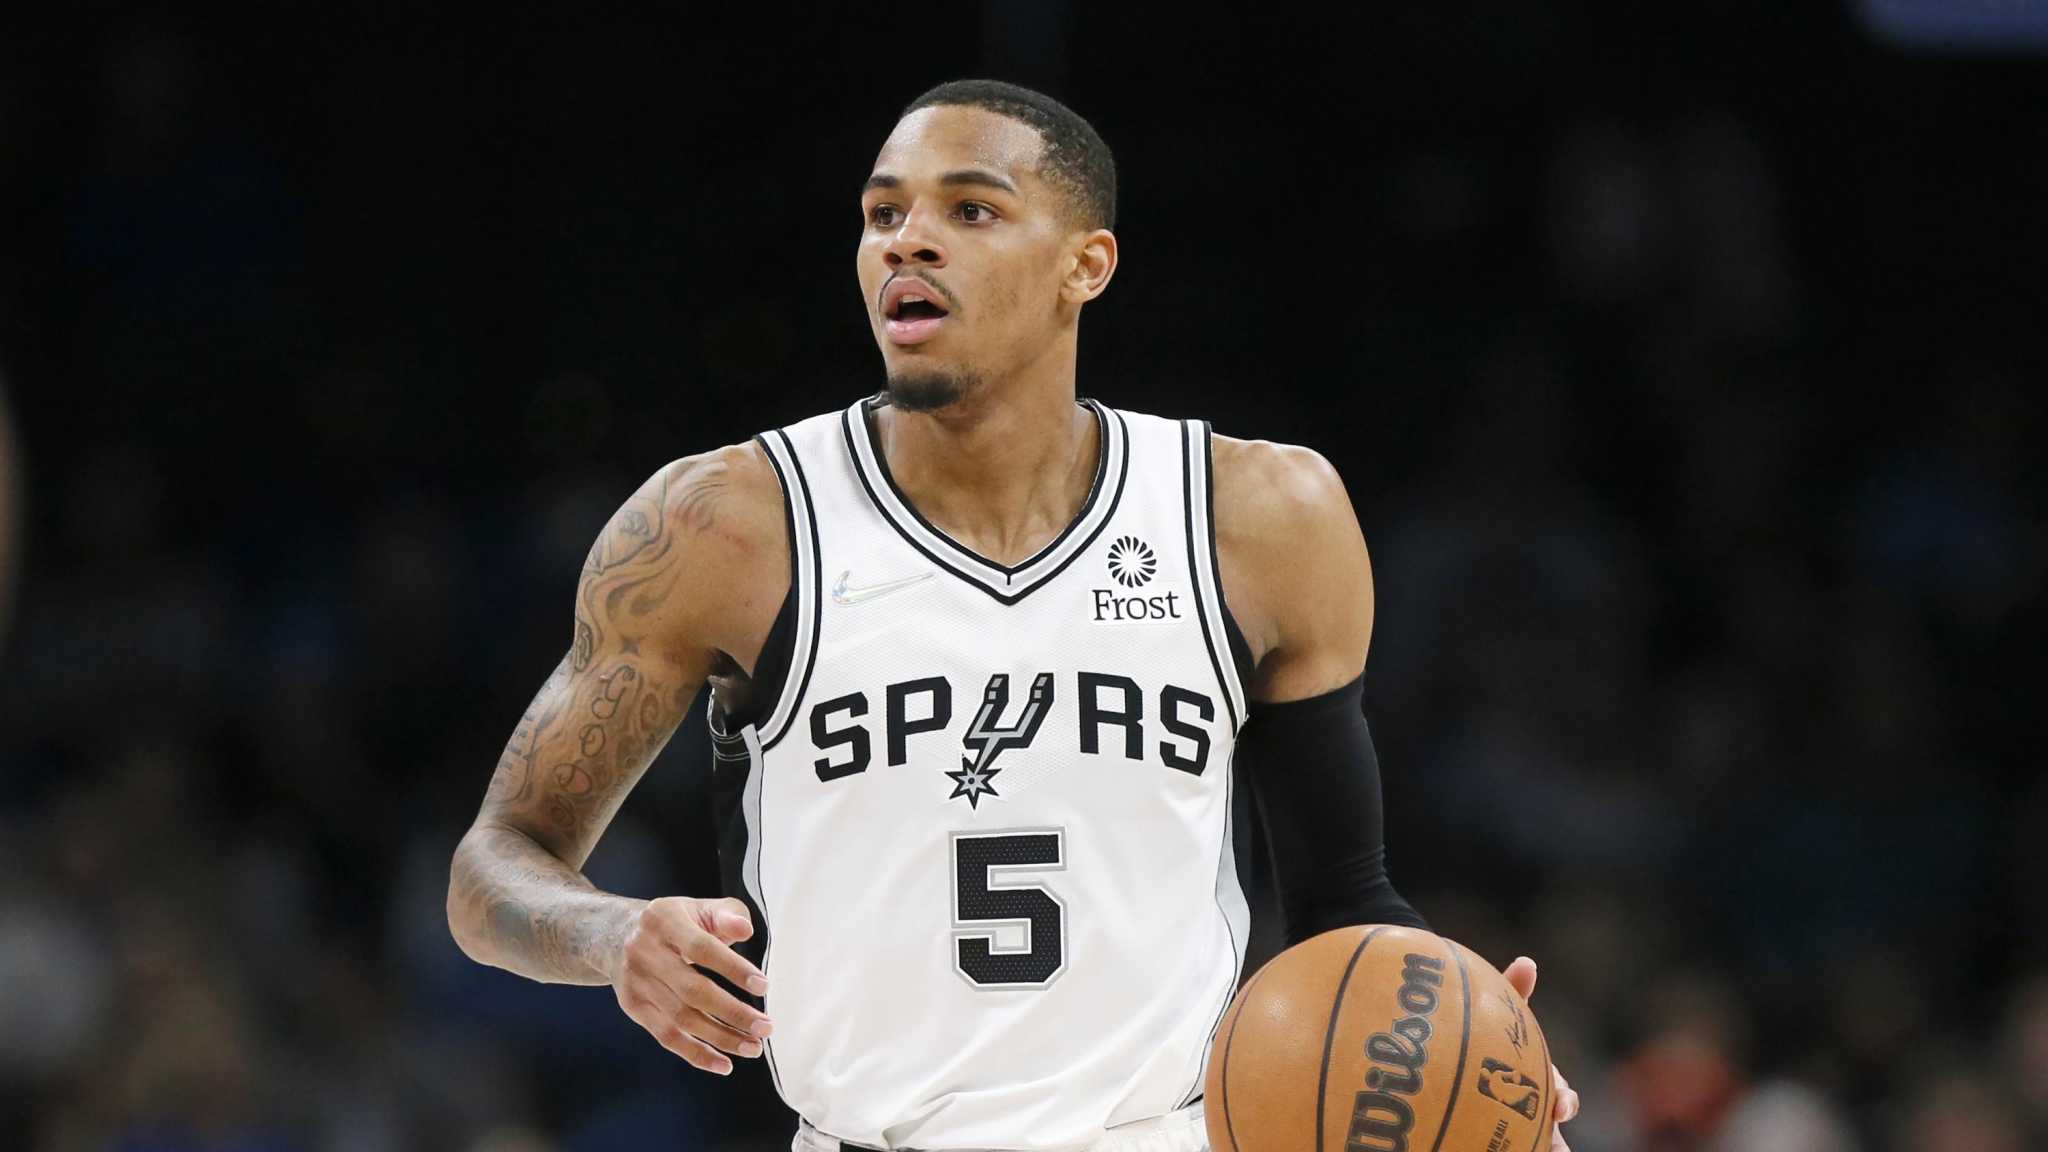 Dejounte Murray becomes the first Spurs player with multiple